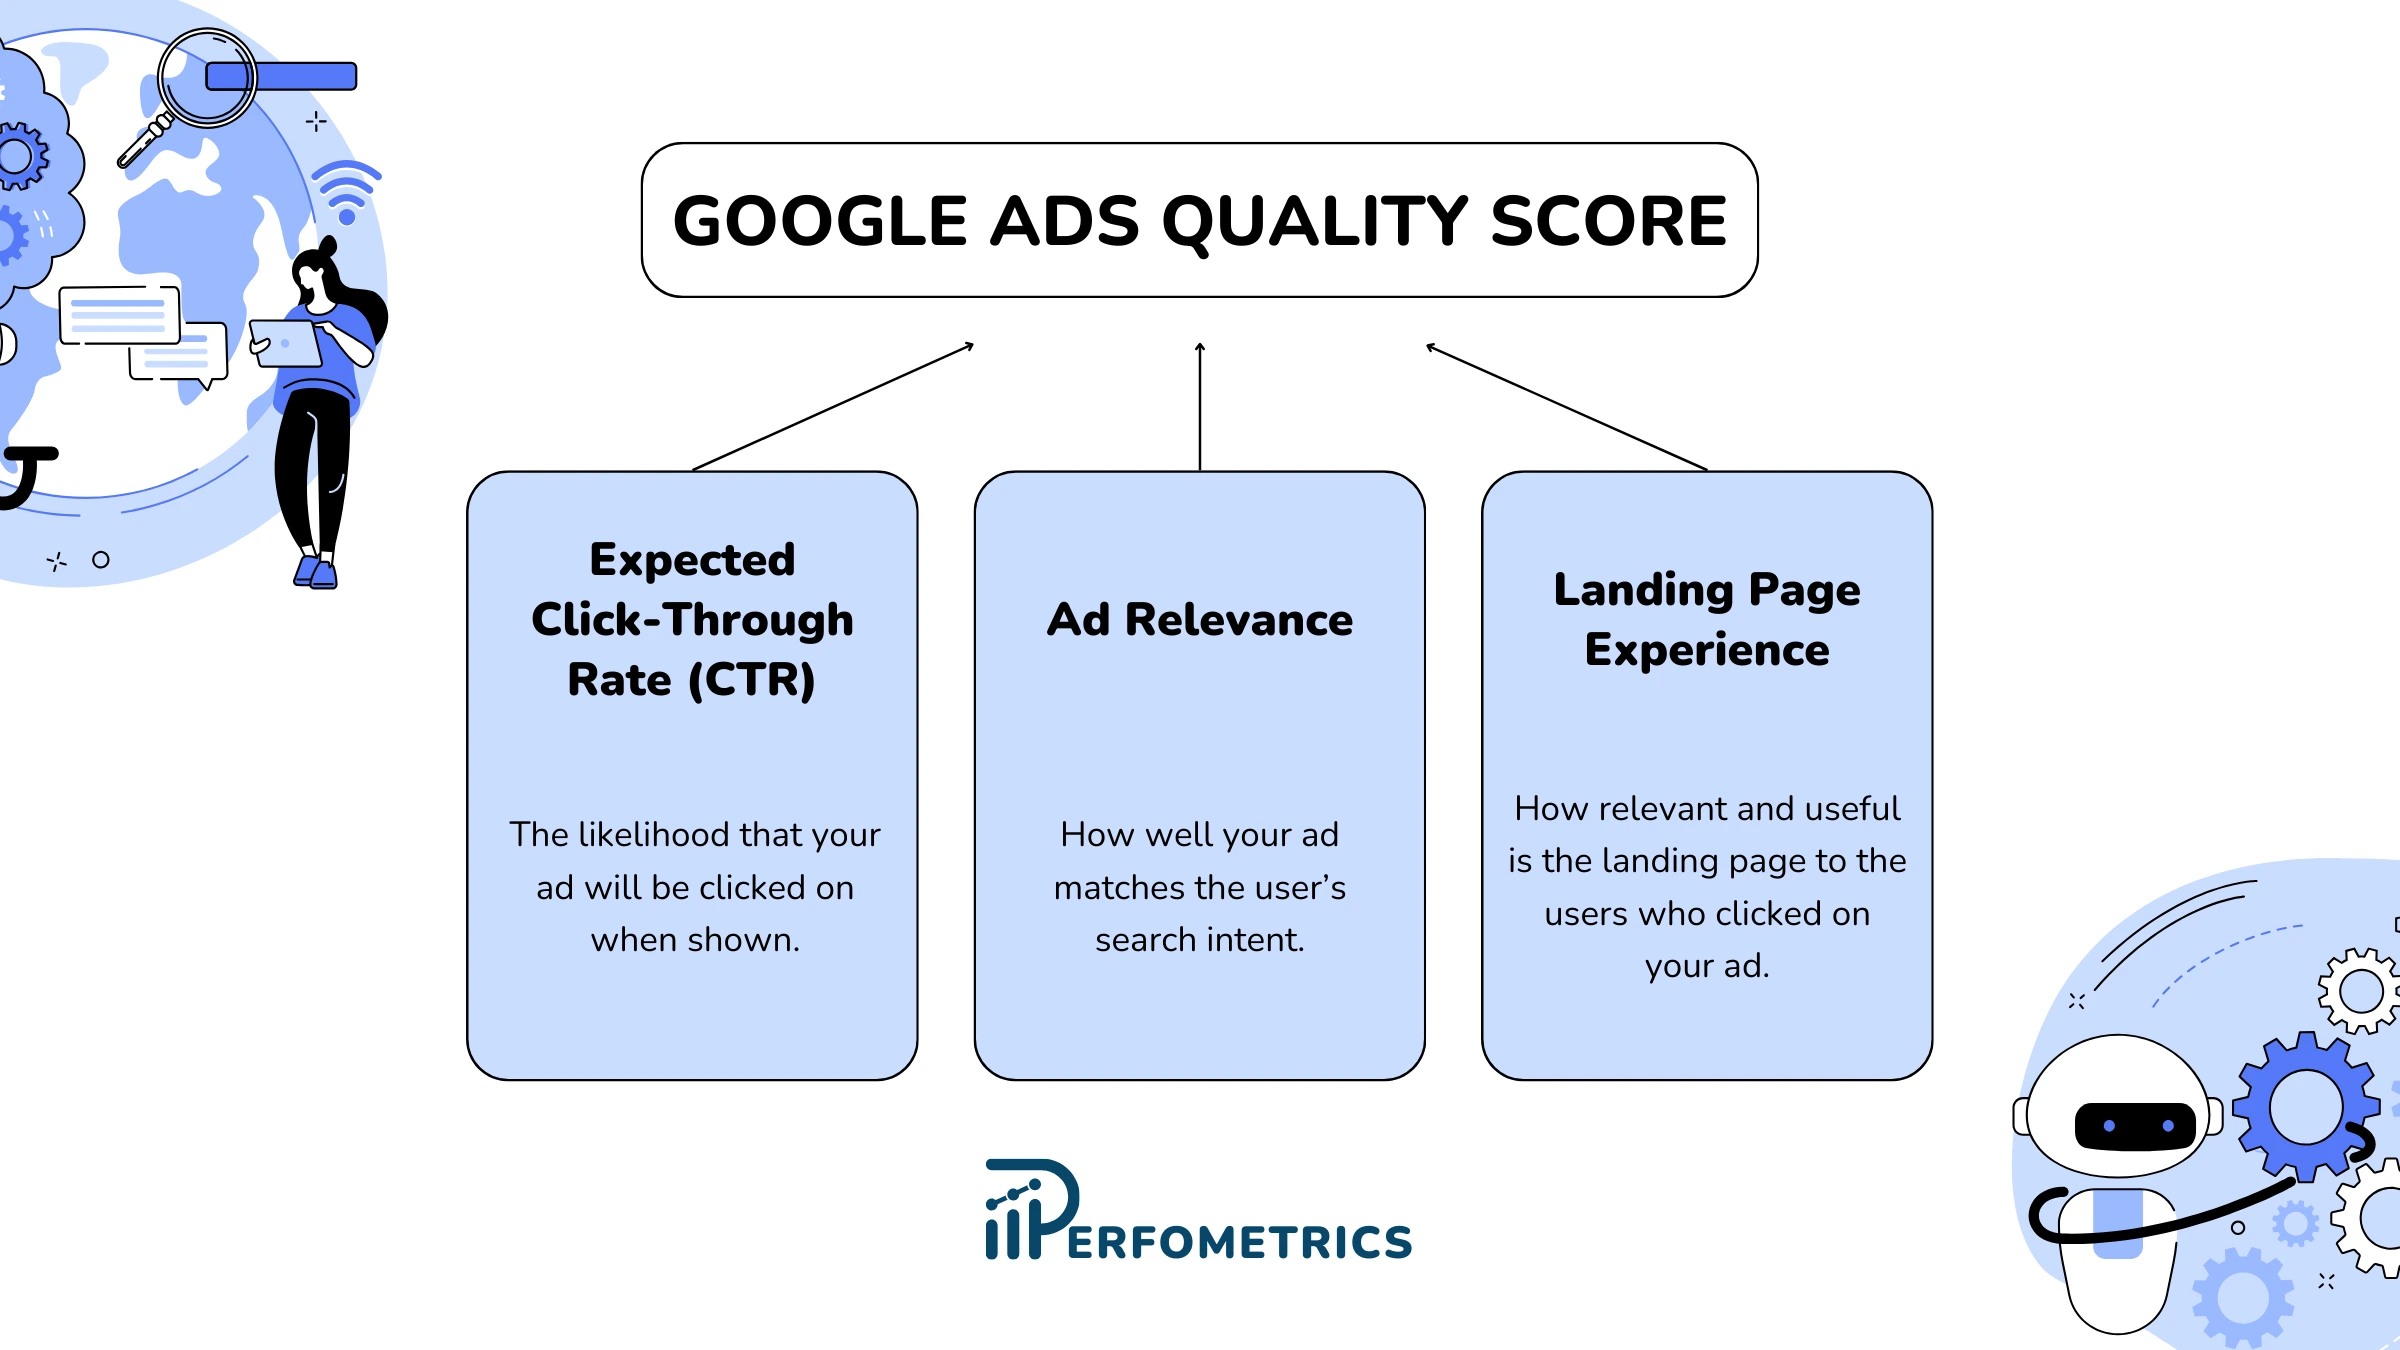 Google Ads Quality Score Components: Expected Click-Through Rate, Ad Relevance and Landing Page Experience